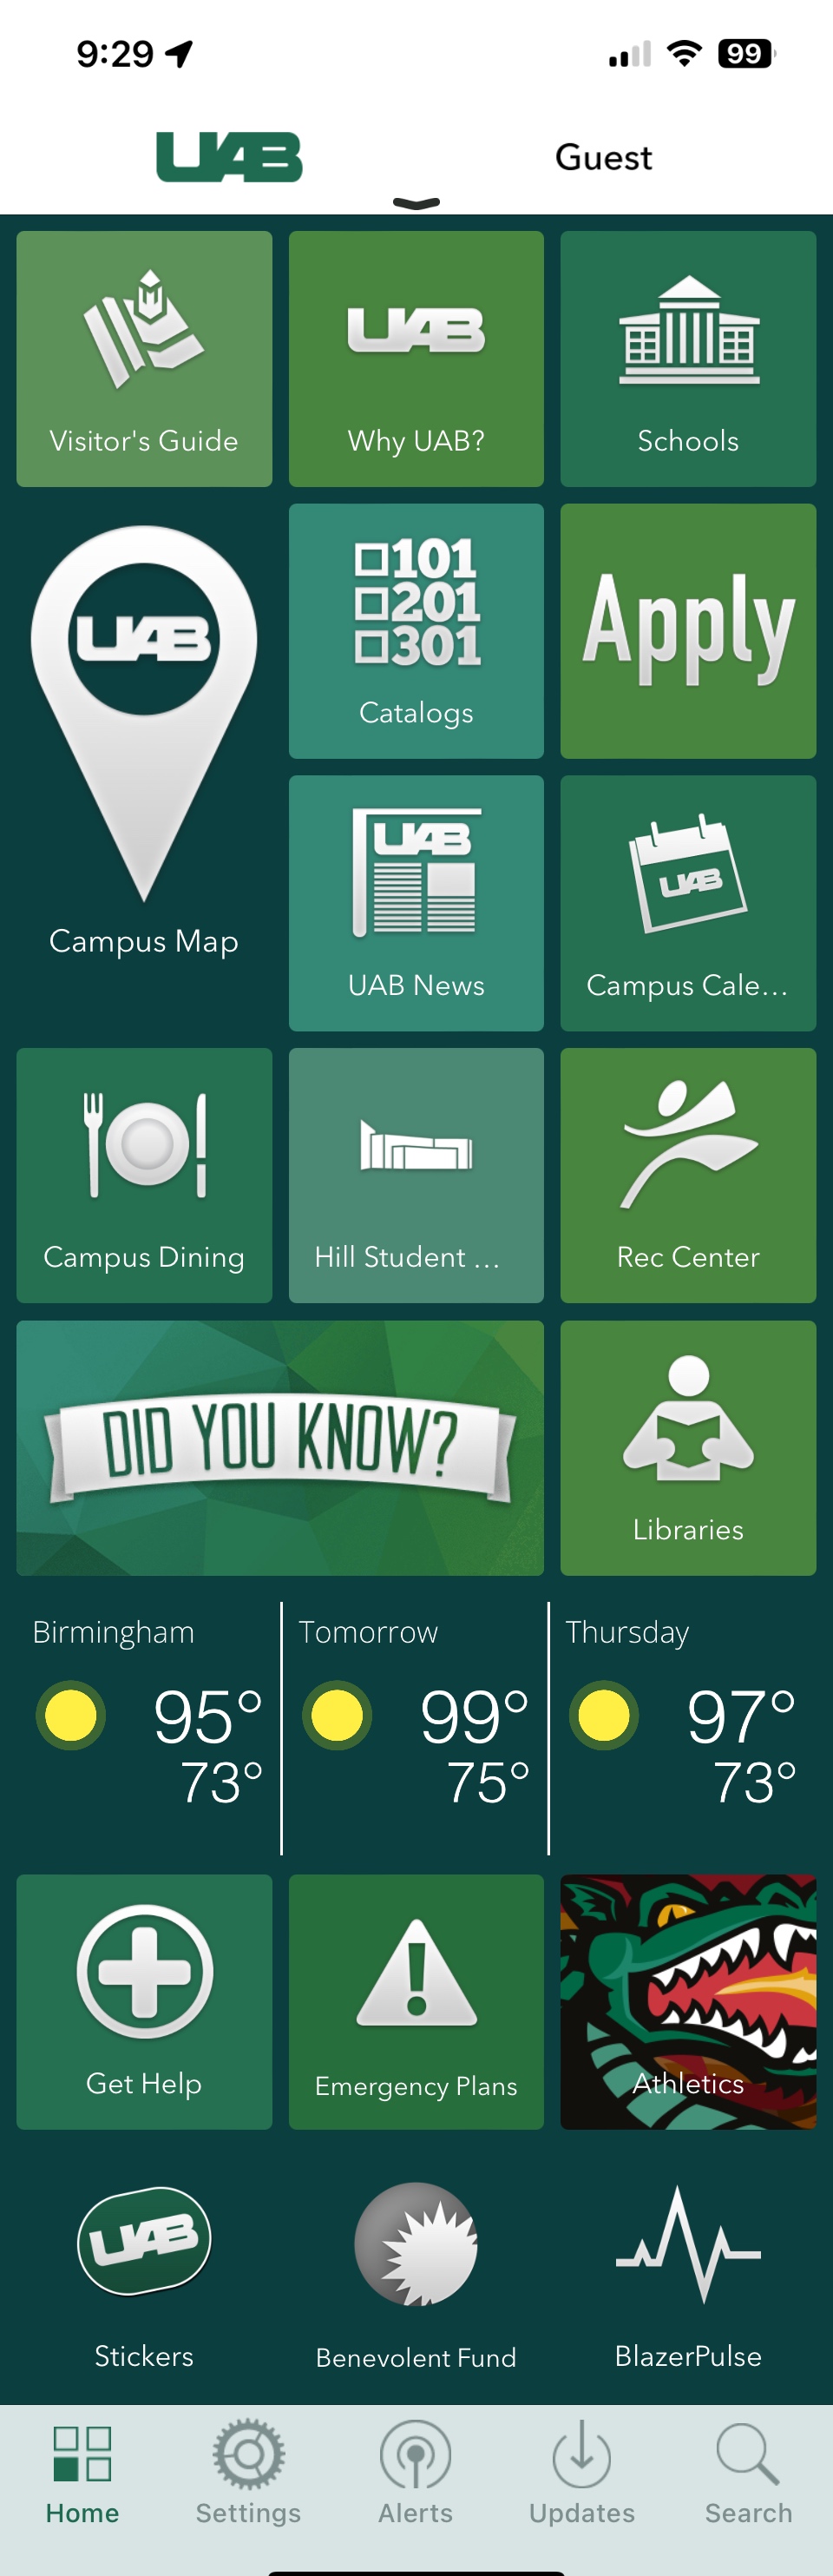 screen capture of the UAB Mobile App showing several tiles